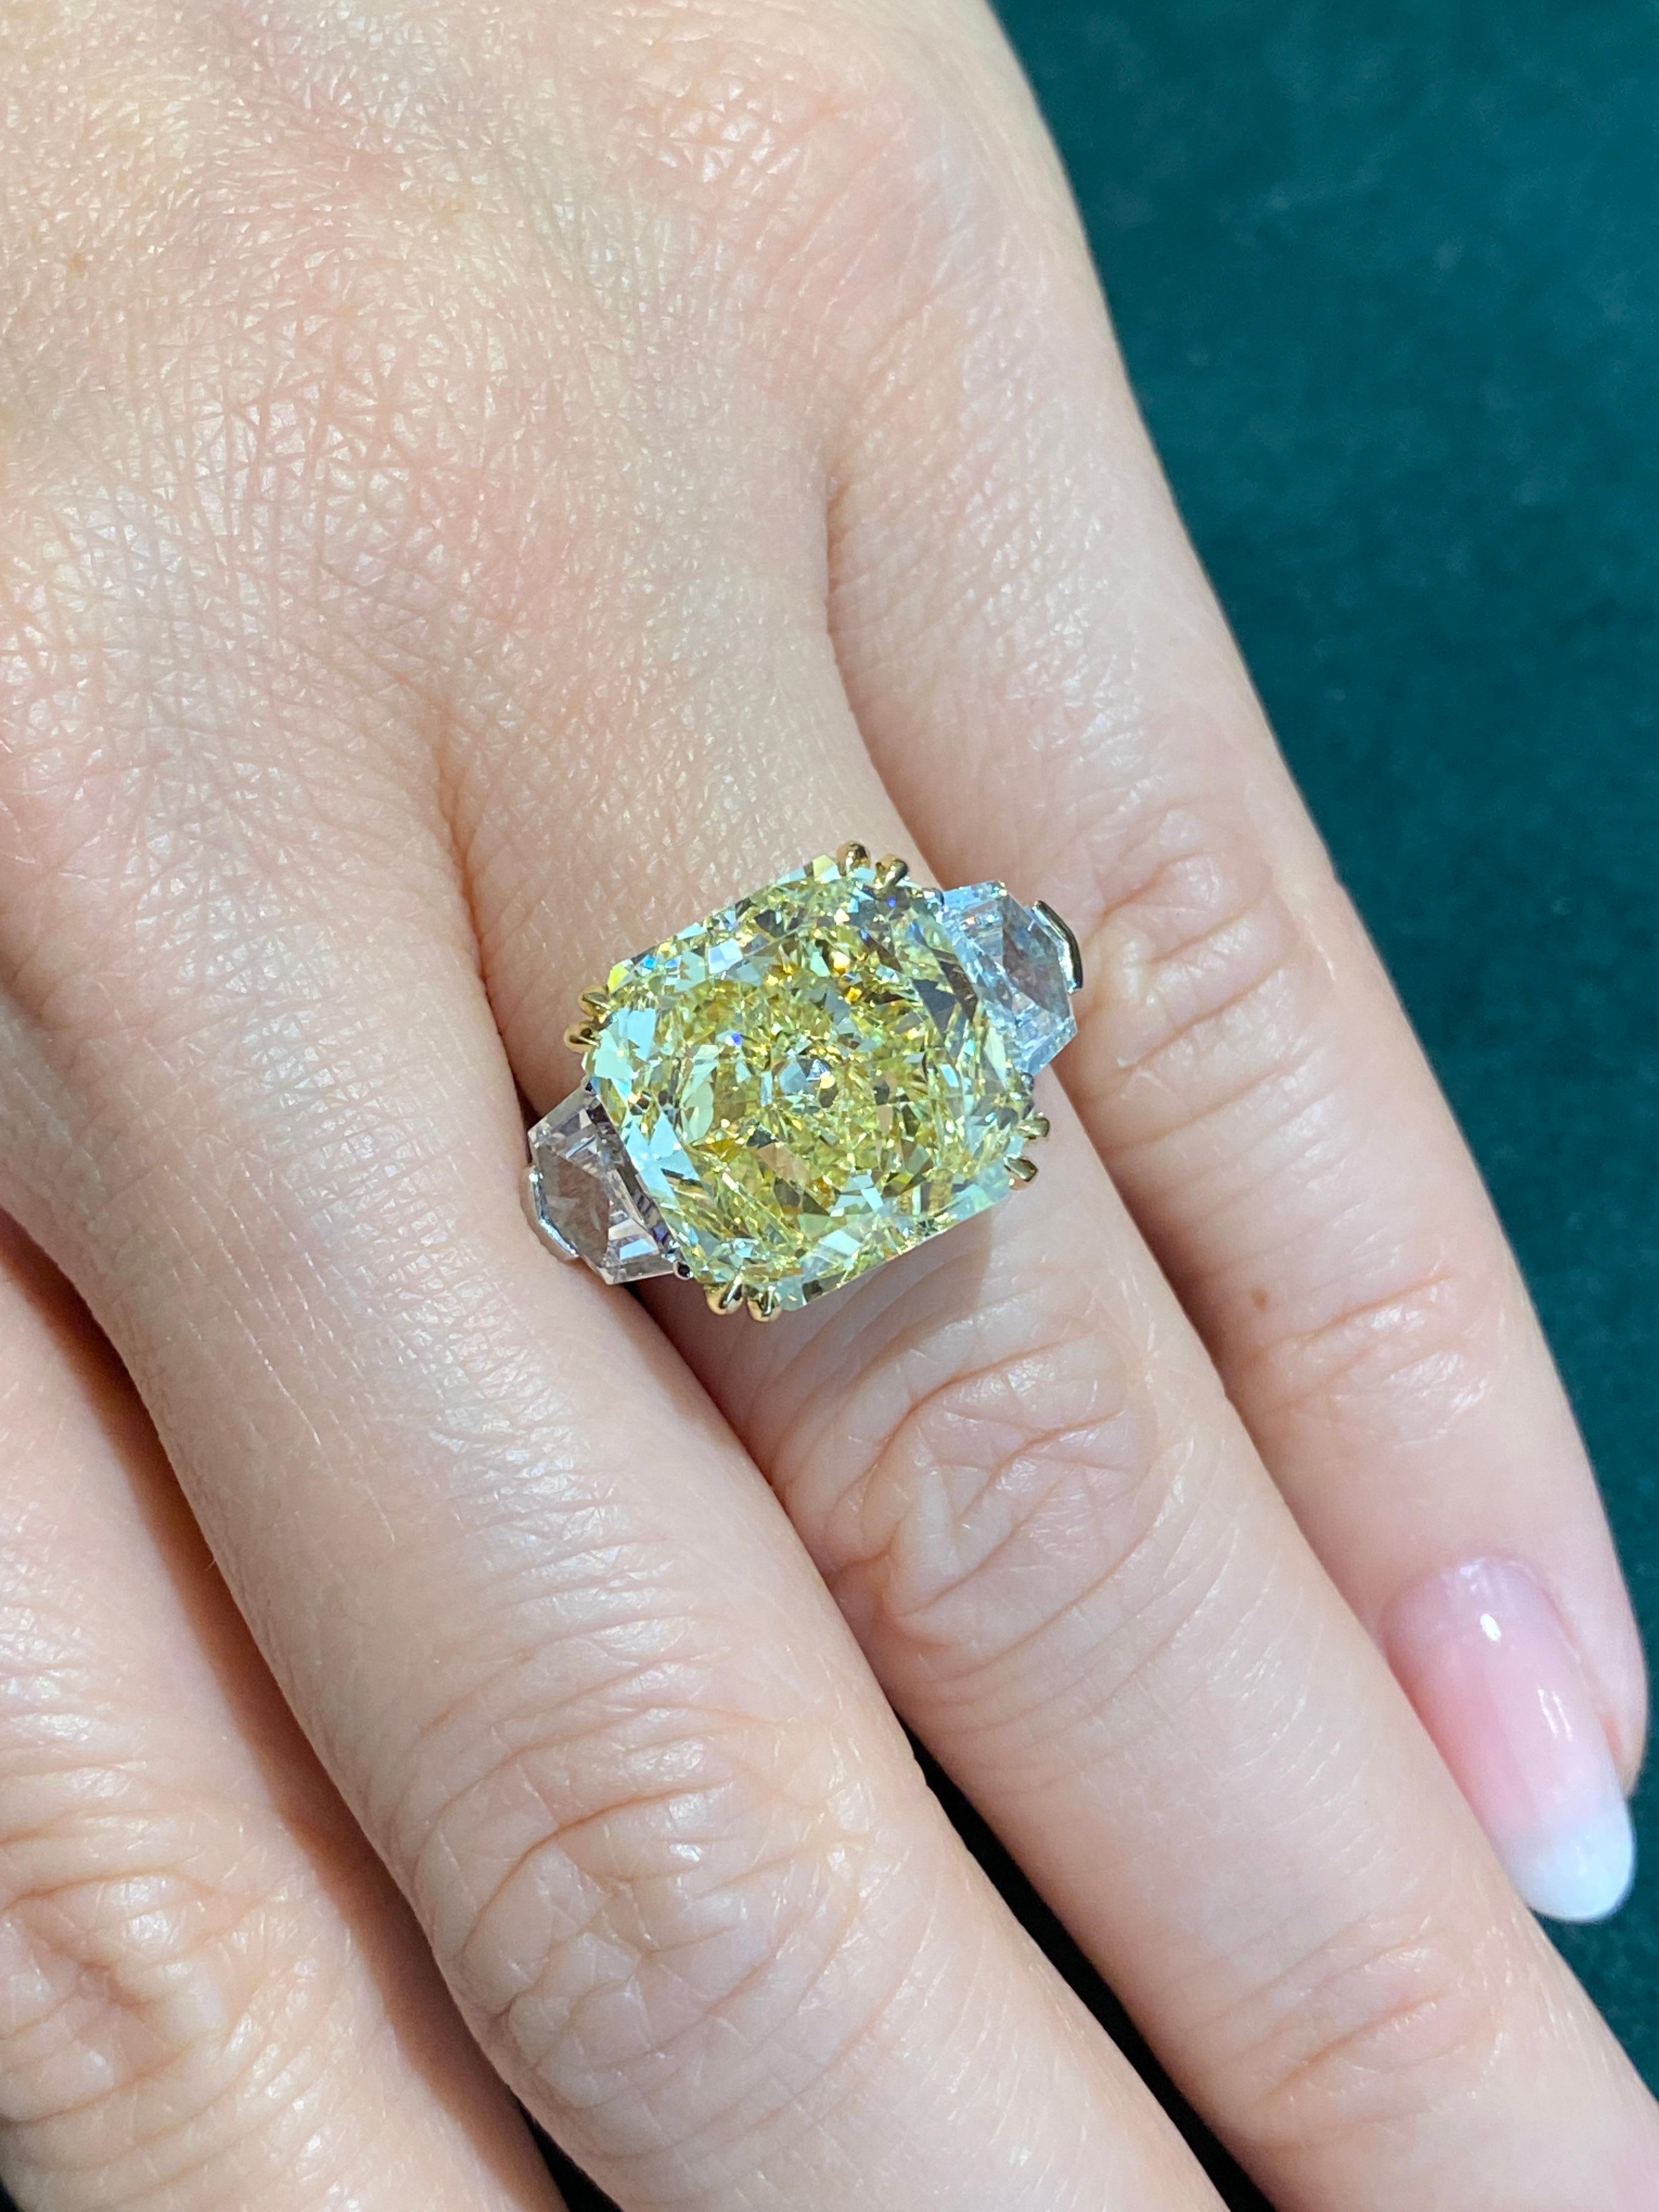 Large Fancy Yellow Diamond Ring in Platinum and 18k Yellow Gold features Center Radiant Cut Diamond
weighing 10.69 carats Fancy Yellow color, VVS2 clarity, GIA certified.
The center diamond is flanked by two shield cut Diamonds weighing 2.11 carats